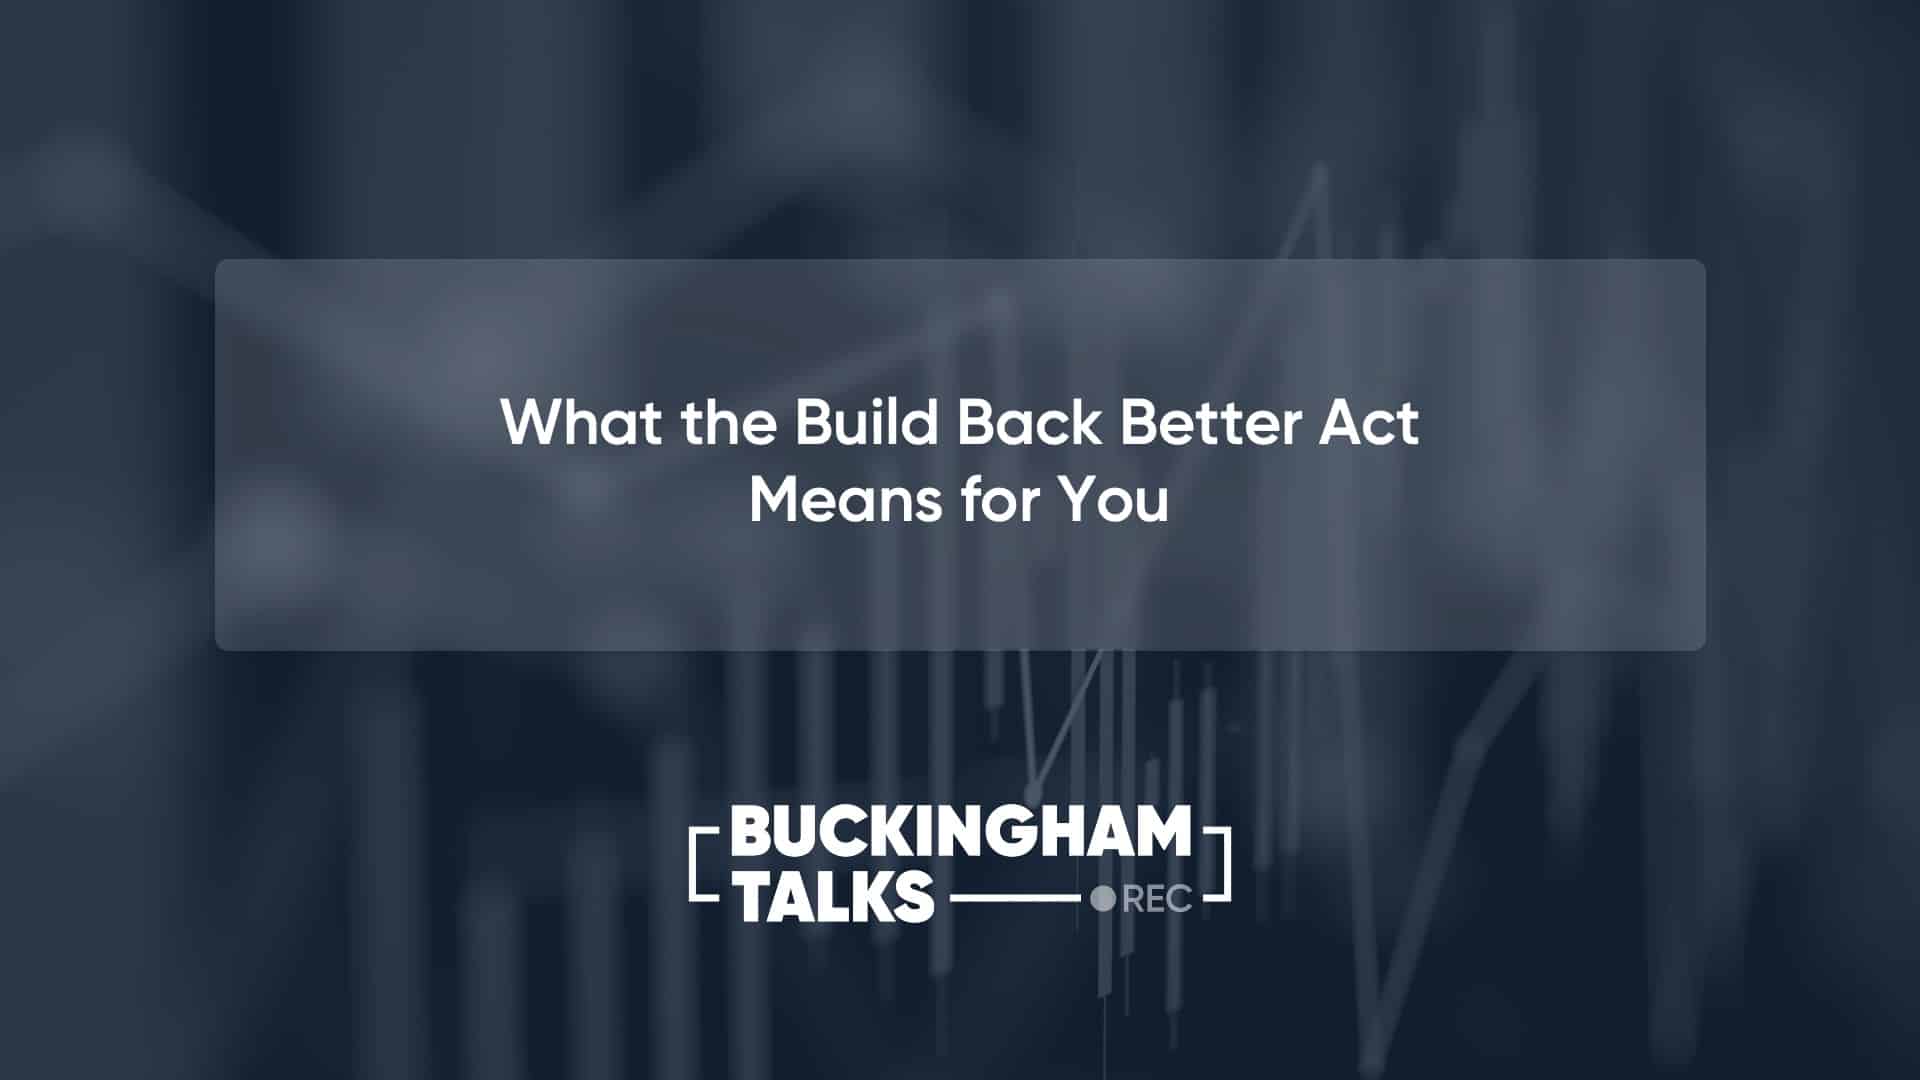 Buckingham Talks: What the Build Back Better Plan Means For You